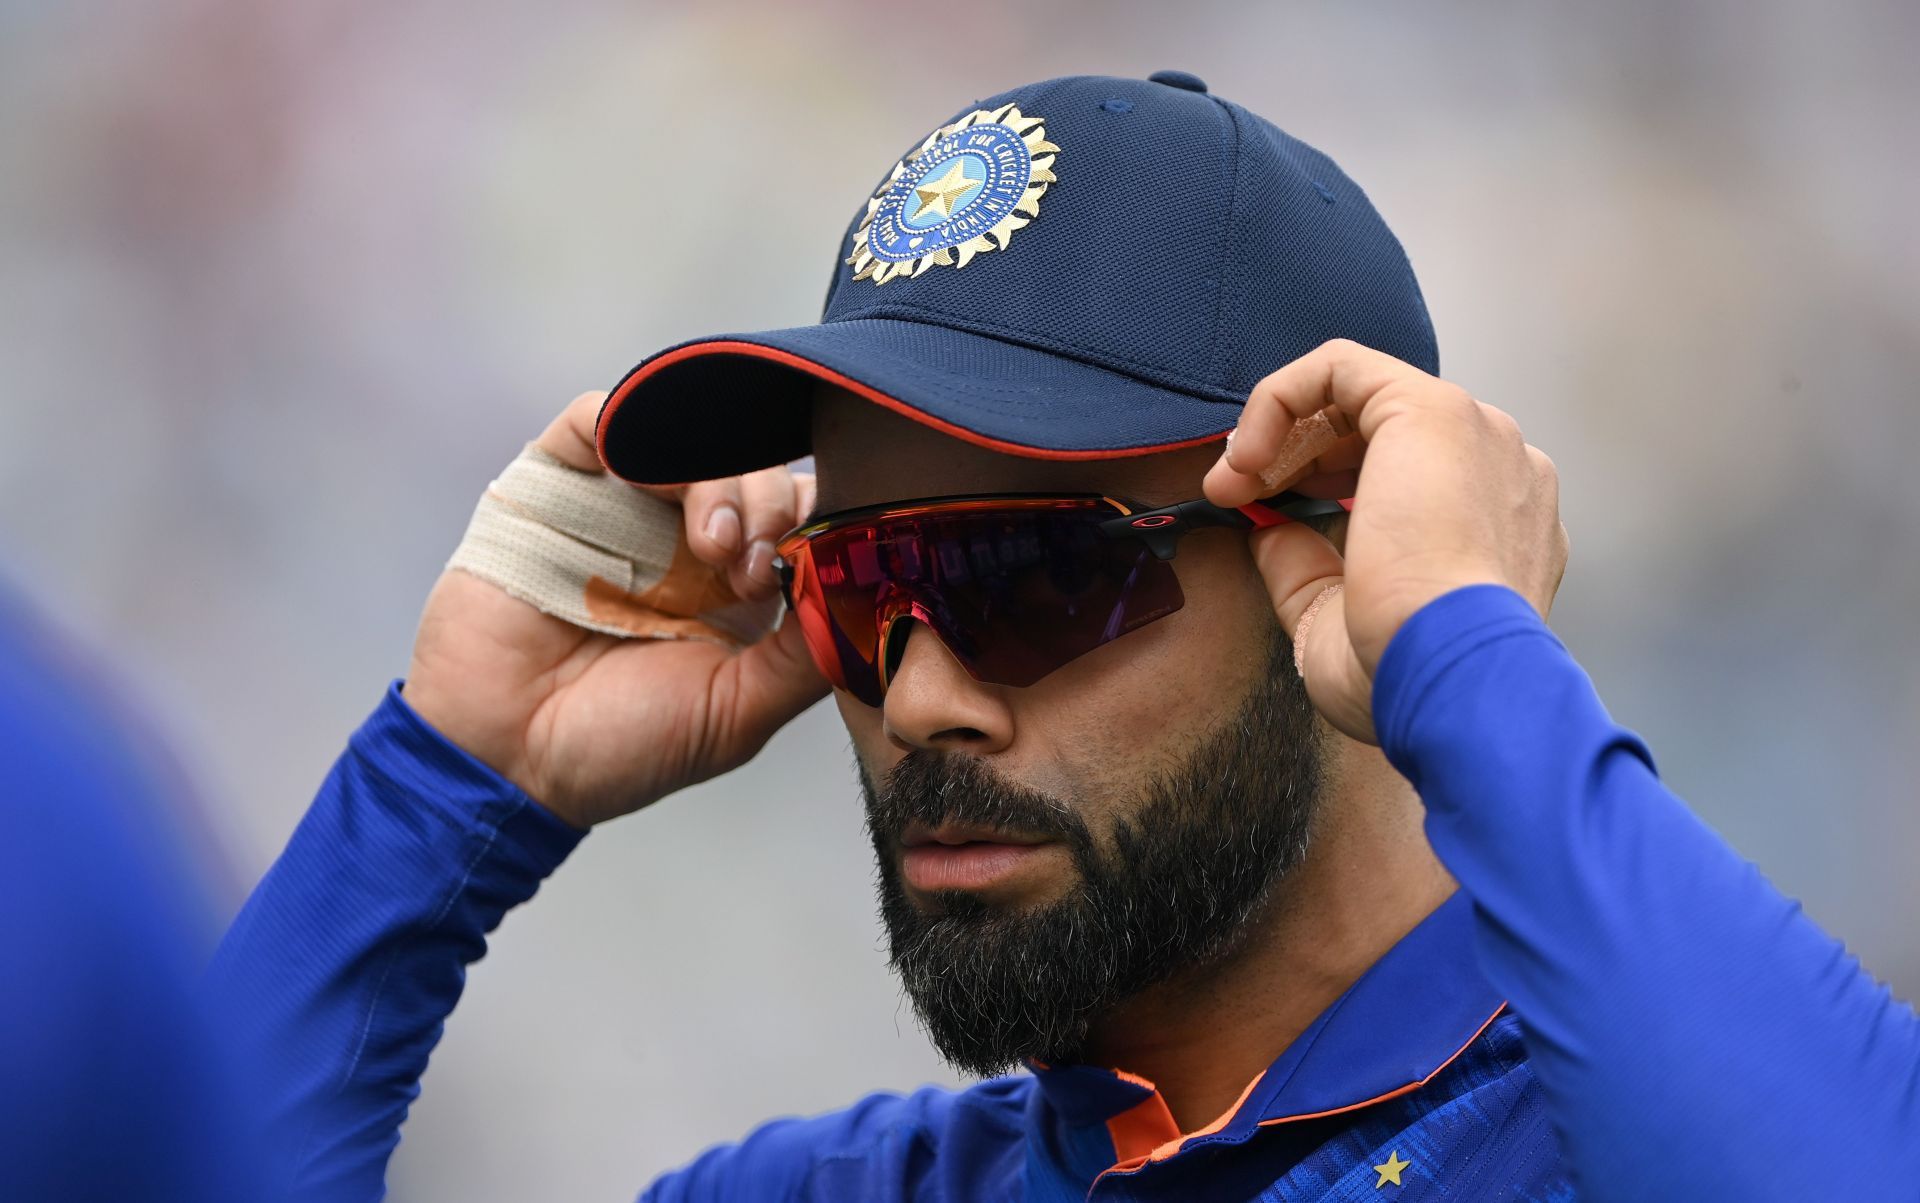 Virat Kohli is unlikely to play matches in the next 25 days (Image: Getty)